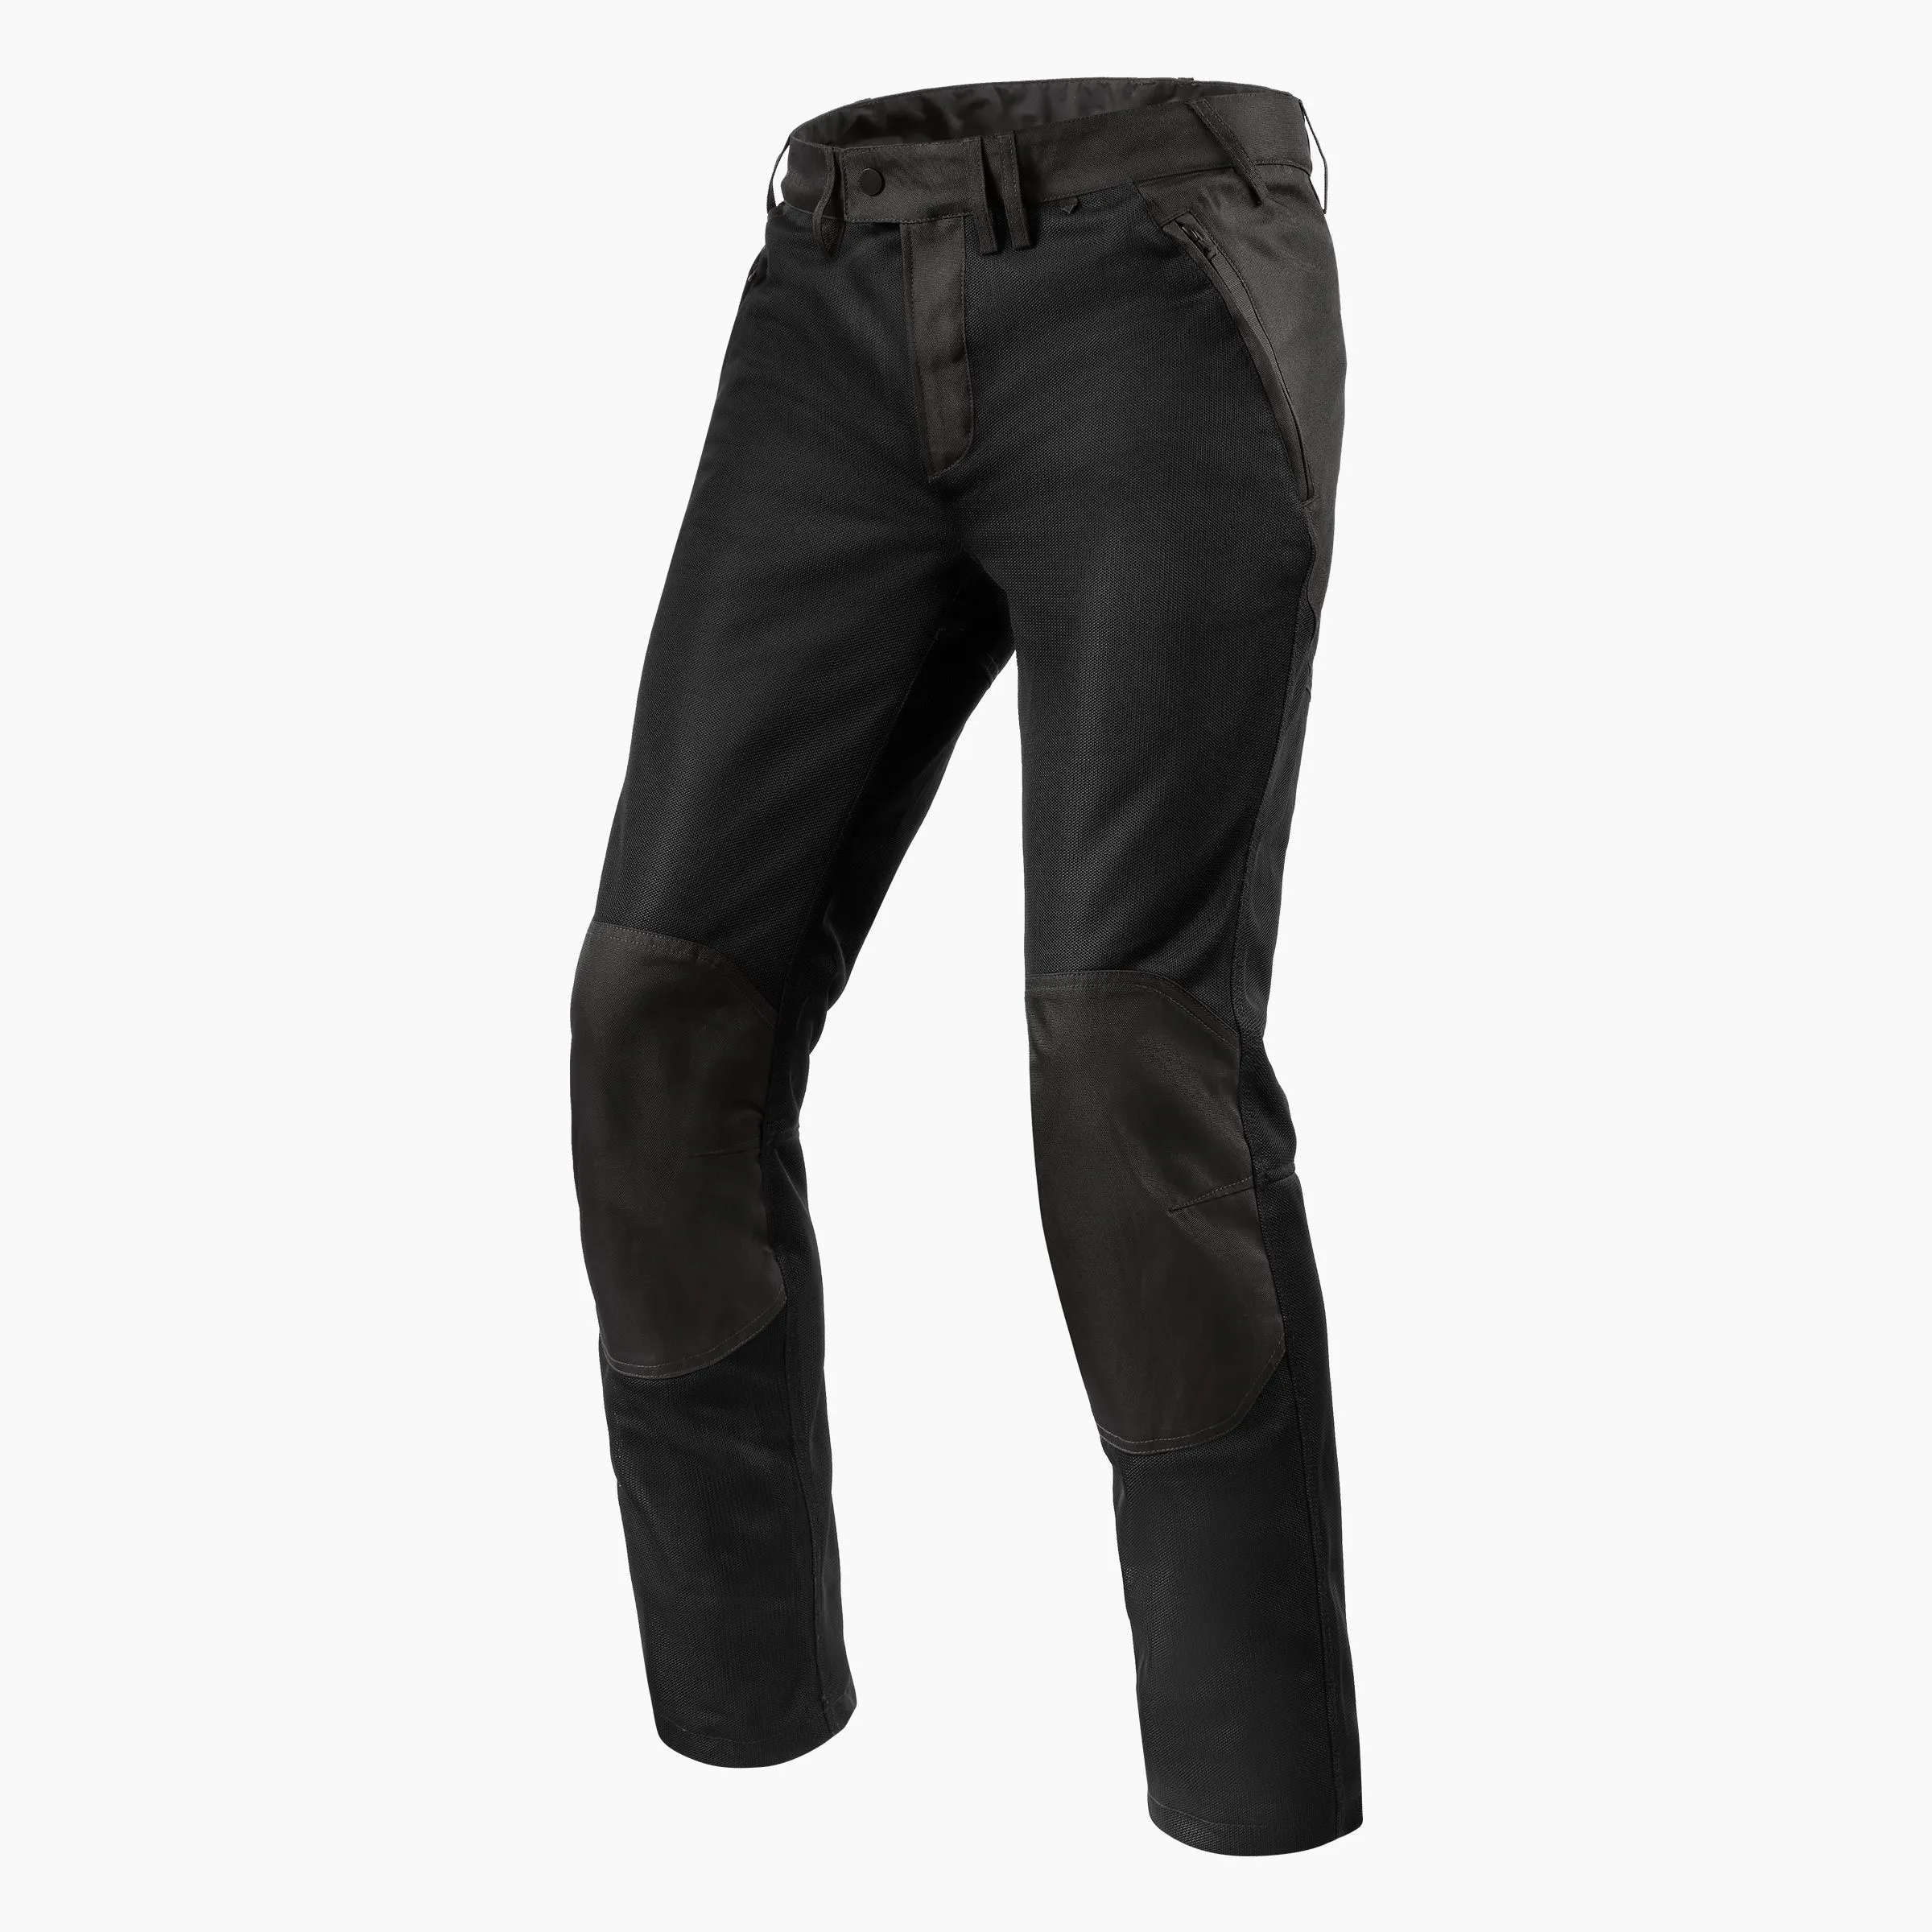 Stratum GORE-TEX Motorcycle Pants | Whatever Mother Nature throws at you,  whenever, wherever.